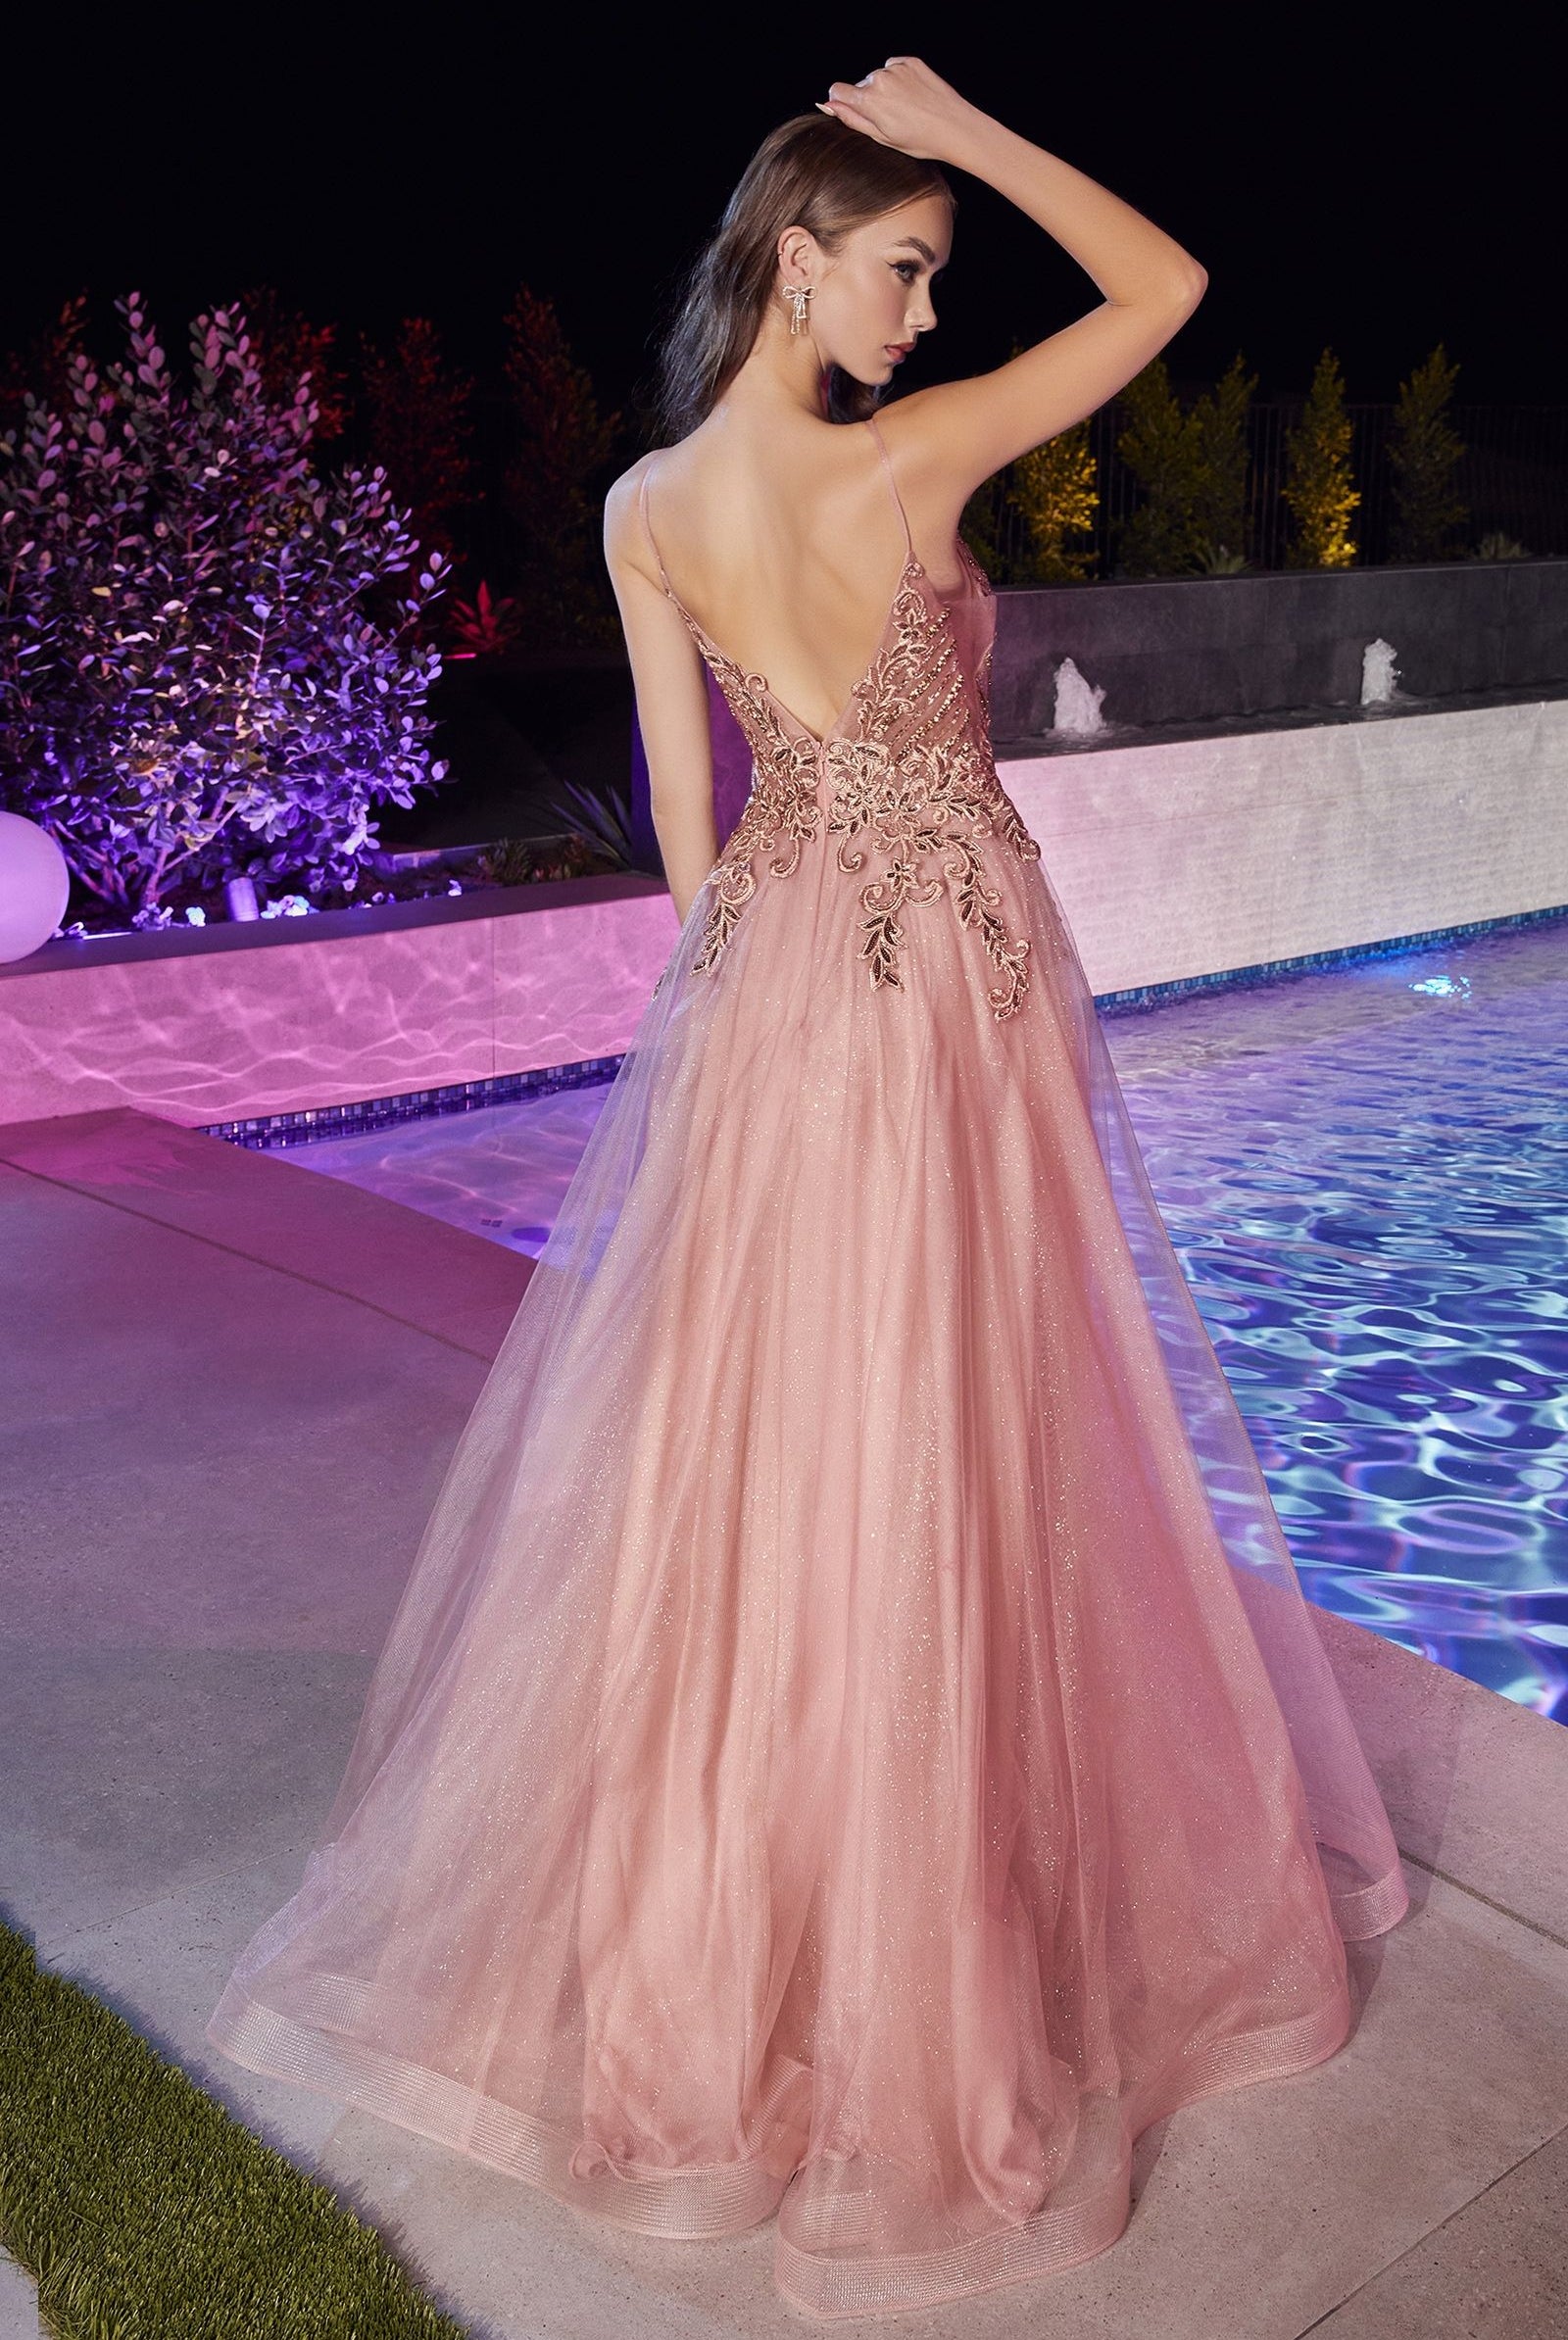 Vintage Tulle Prom & Bridesmaid Gown, Glittery Embroidered Bodice, Deep V-neck & Pointy Back-smcdress